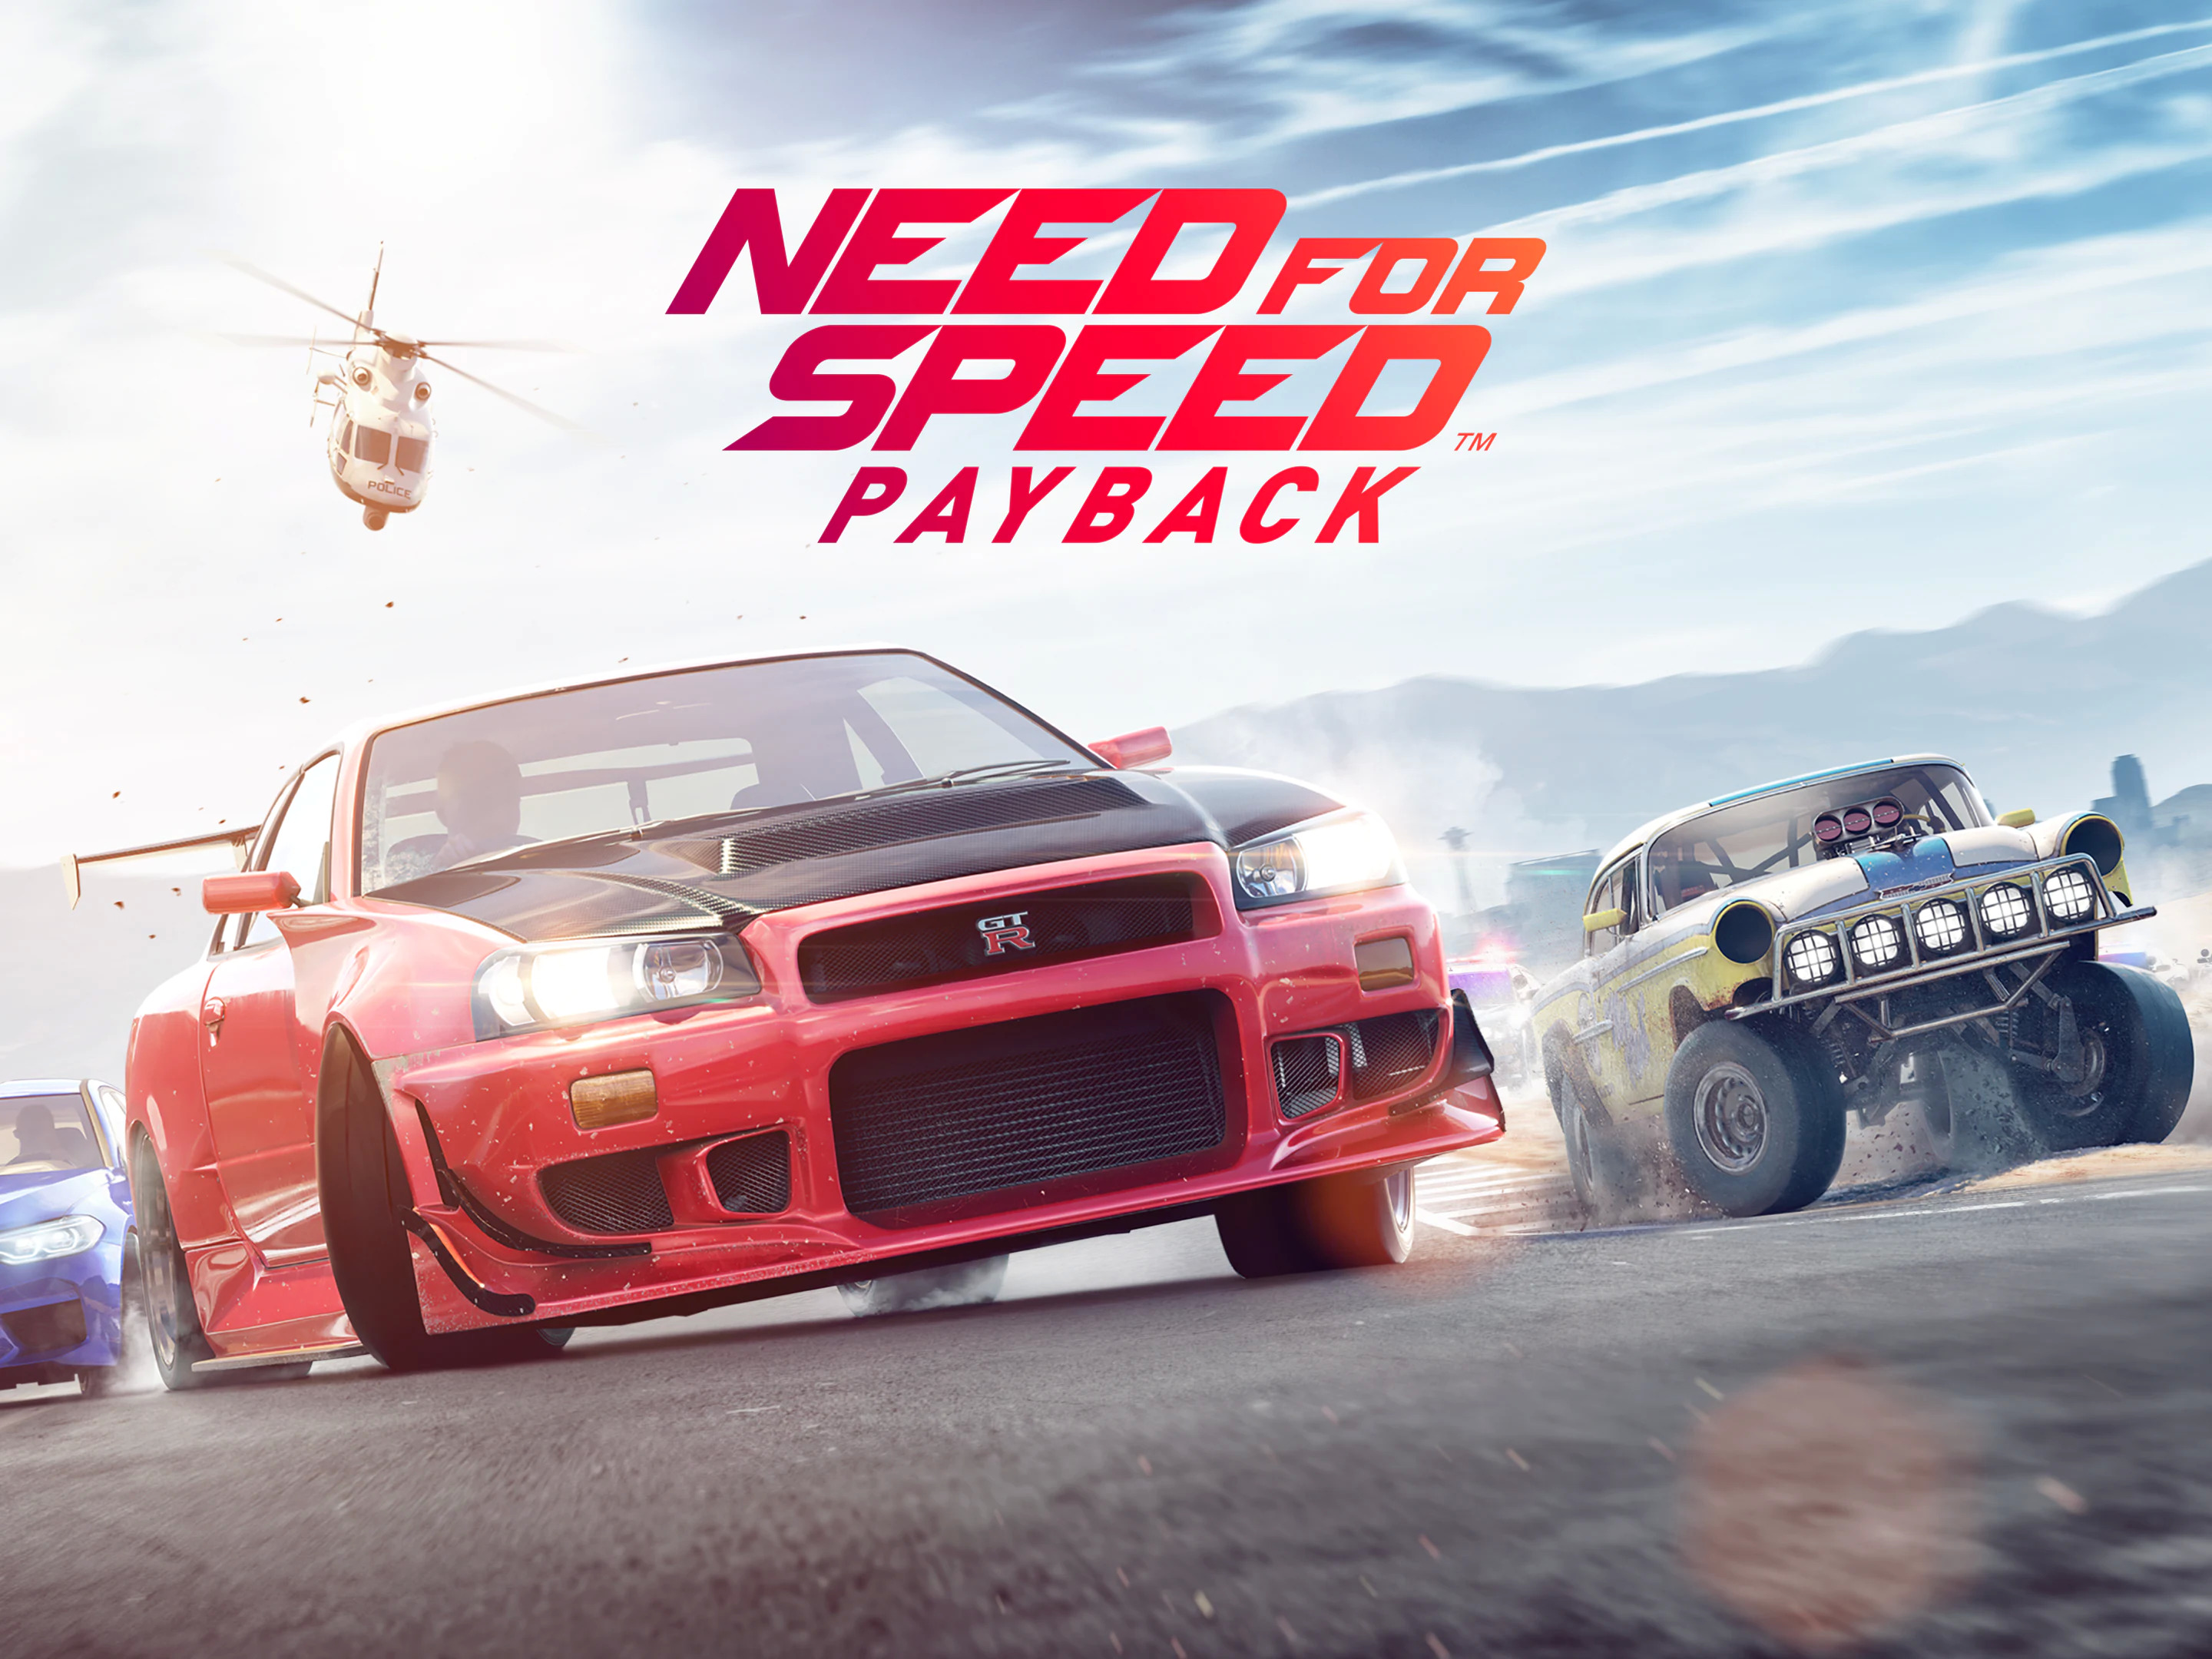 Xbox GamePass Members: Need for Speed Payback $3 & More (Xbox One, Series X|S Digital Download)